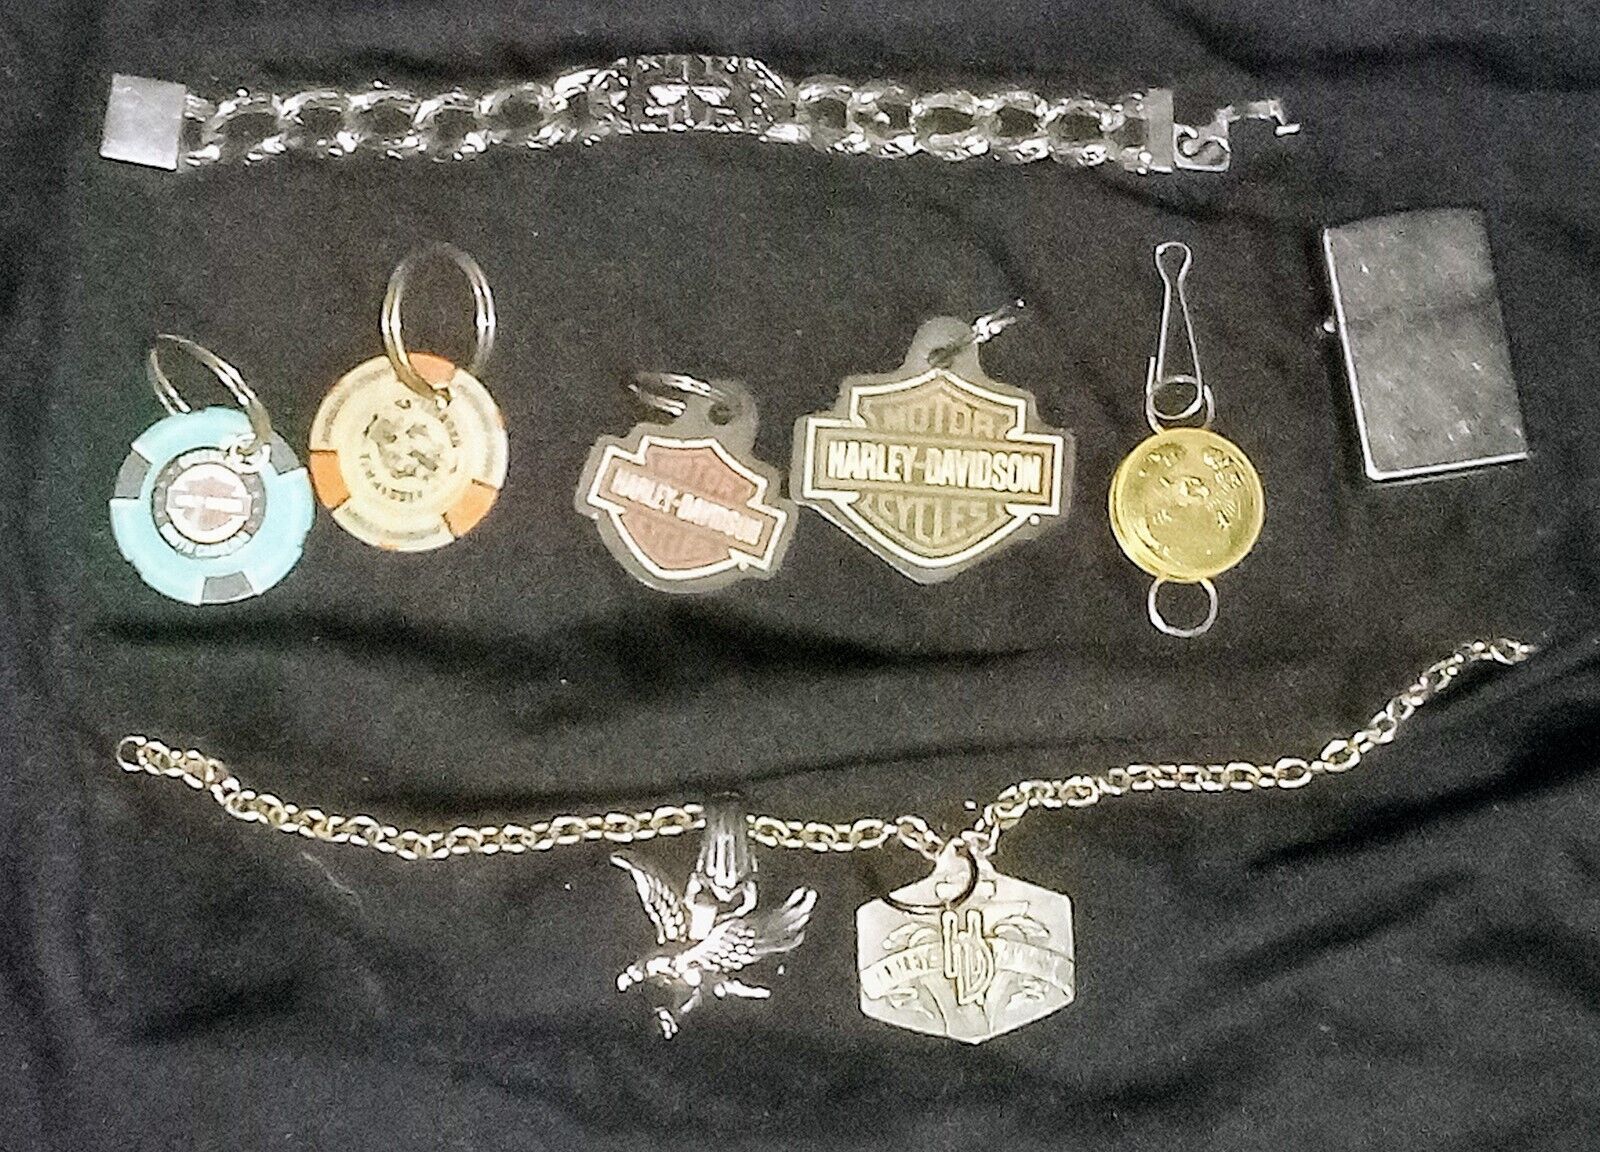 Harley Davidson Charms And Key Chain Lot With Zippo Lighter And Cross Bracelet